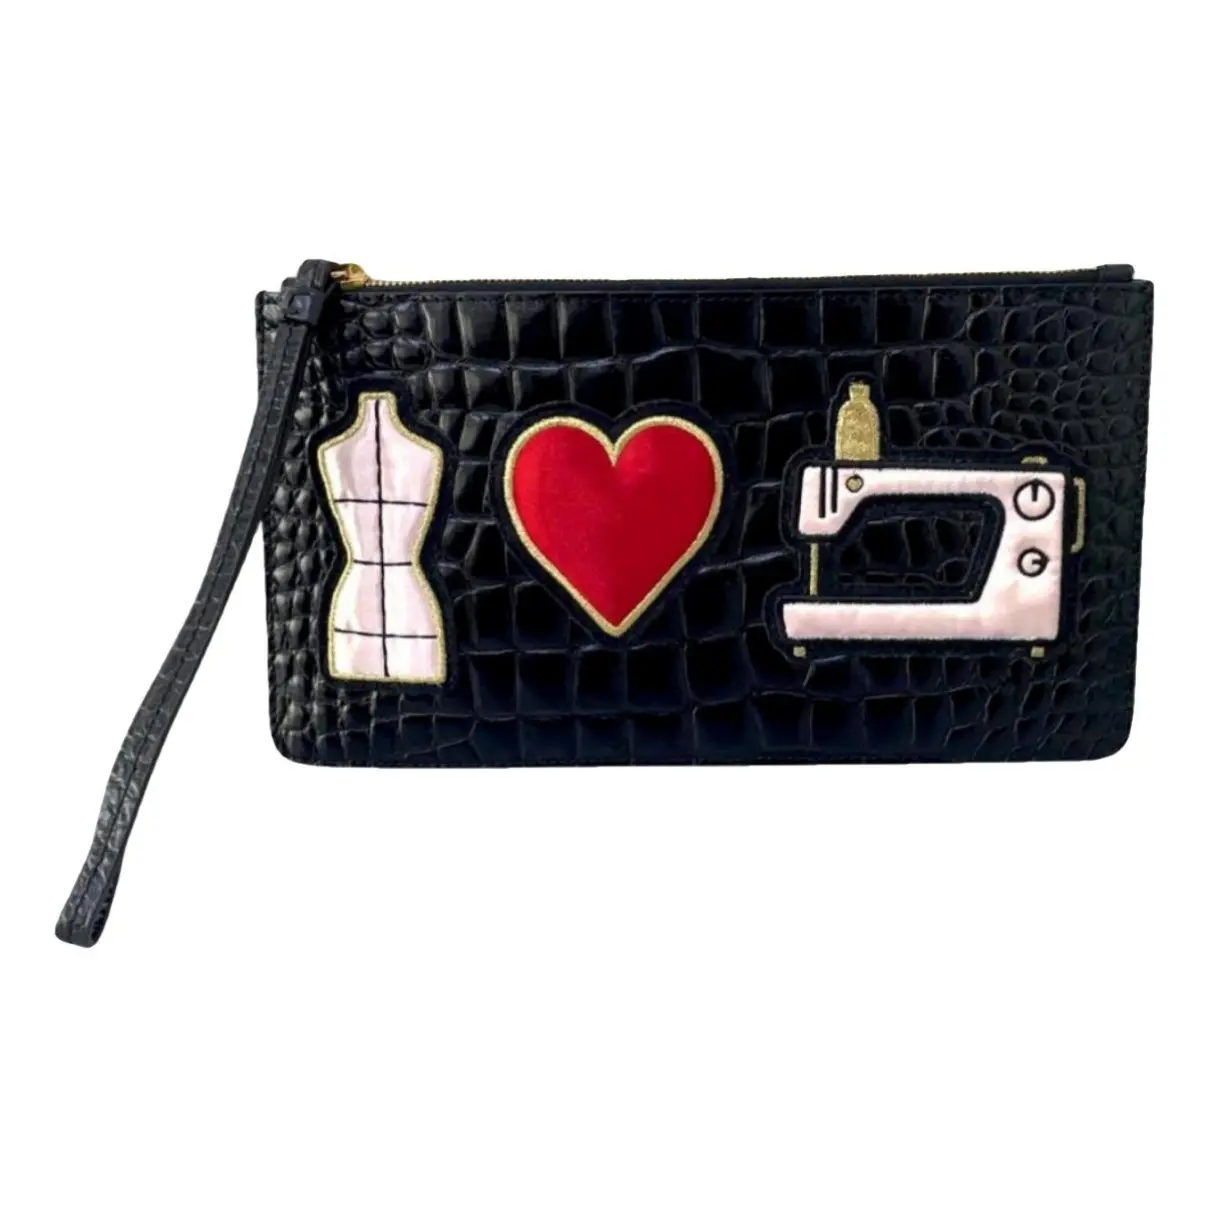 Leather clutch bag Moschino Cheap And Chic - Vintage